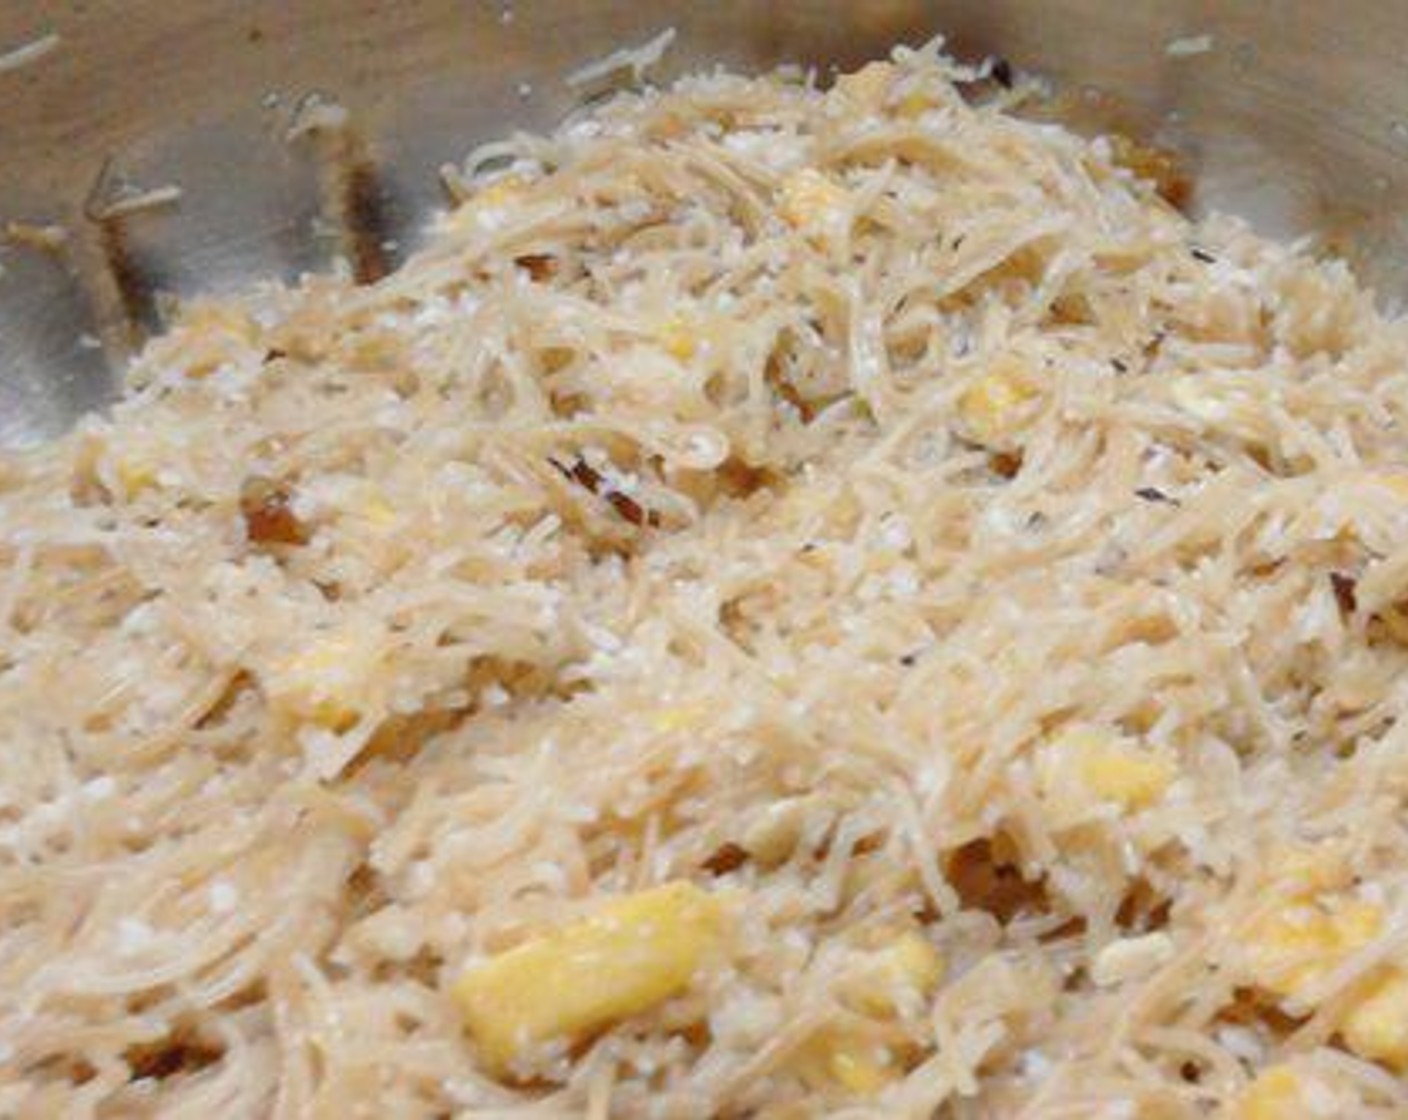 step 1 Cook the Vermicelli Noodles (7 oz) adding Water (to taste). To this add Coconut (1 cup), Cashew Nuts (1 Tbsp), Raisins (1 Tbsp), Bananas (2), Caster Sugar (1/4 cup), Ground Cardamom (1/2 tsp), and All-Purpose Flour (2 Tbsp). Mix well